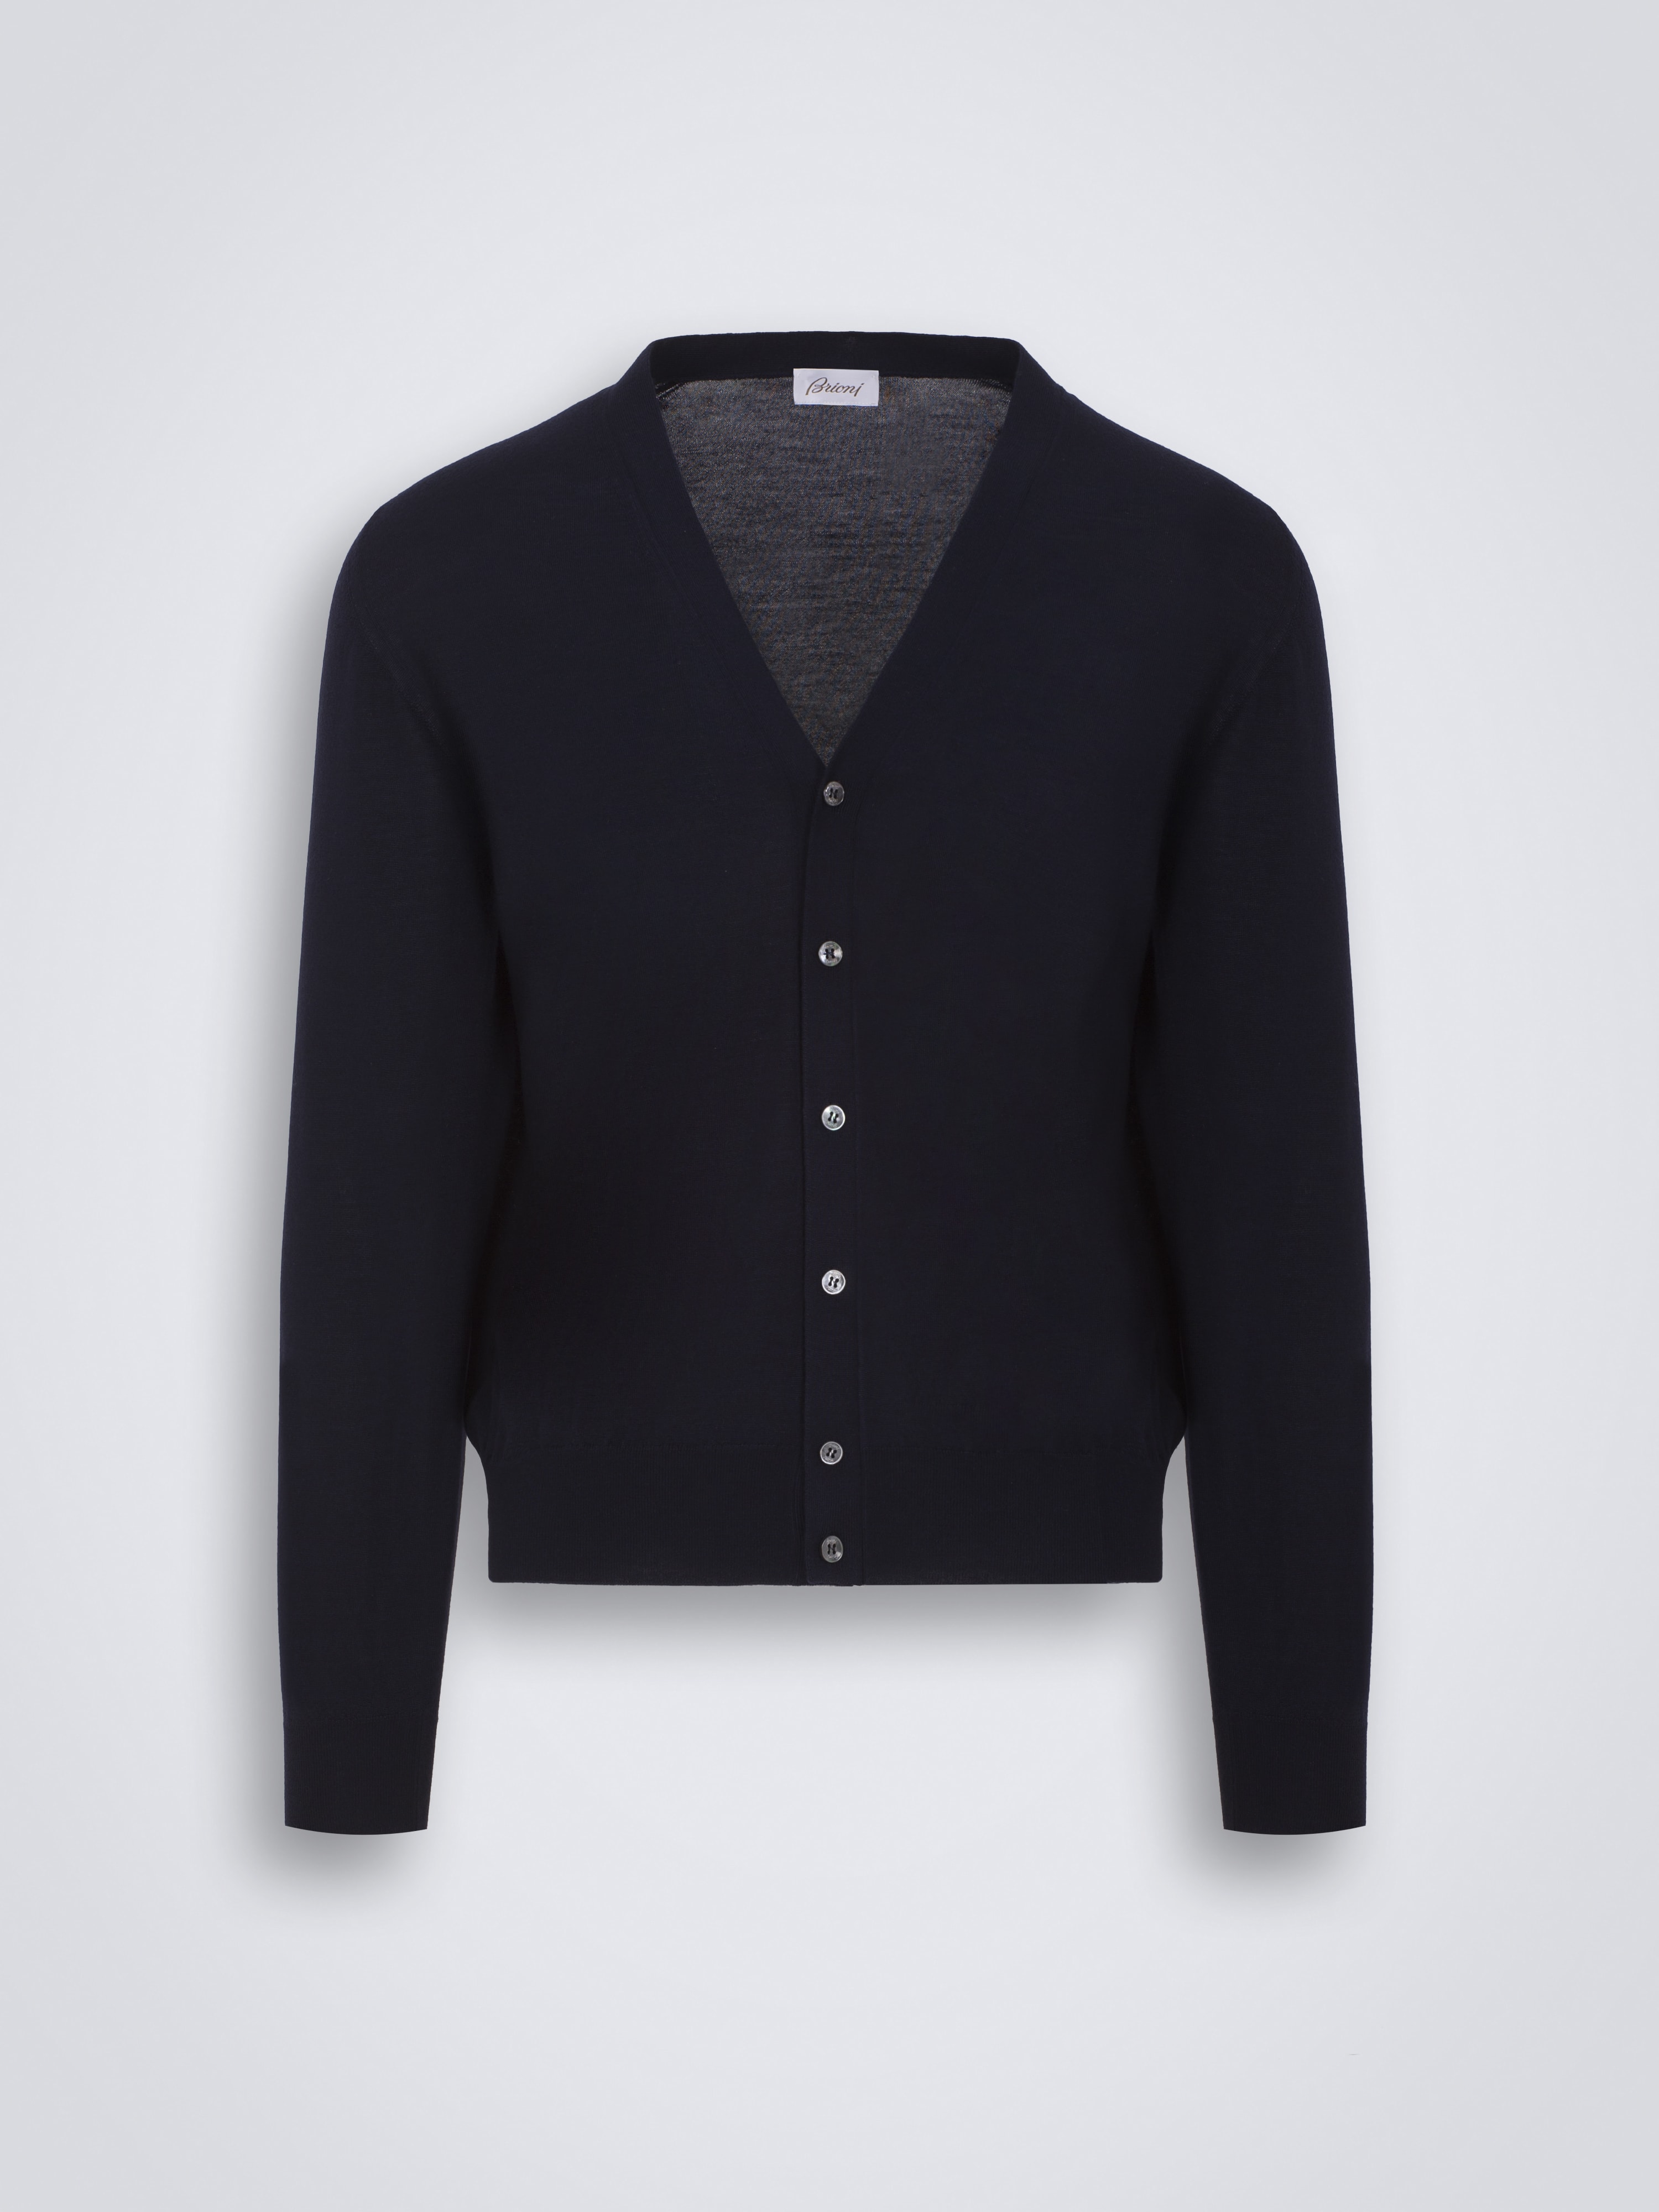 Essential navy blue cardigan | Brioni® PY Official Store